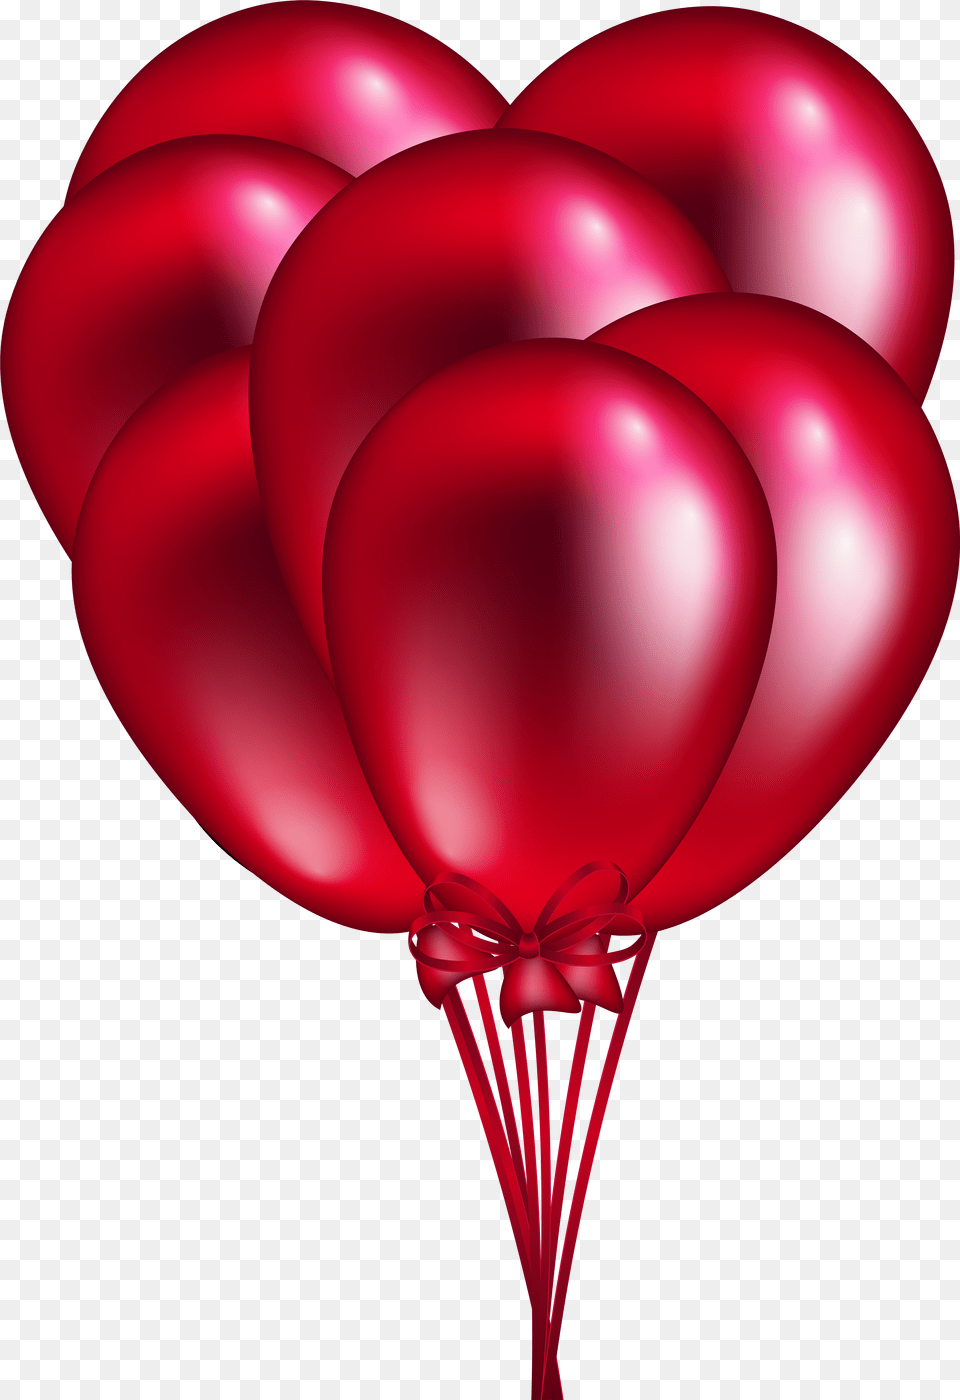 Library Of Heart Balloon Vector Black Background Red Balloons Free Transparent Png